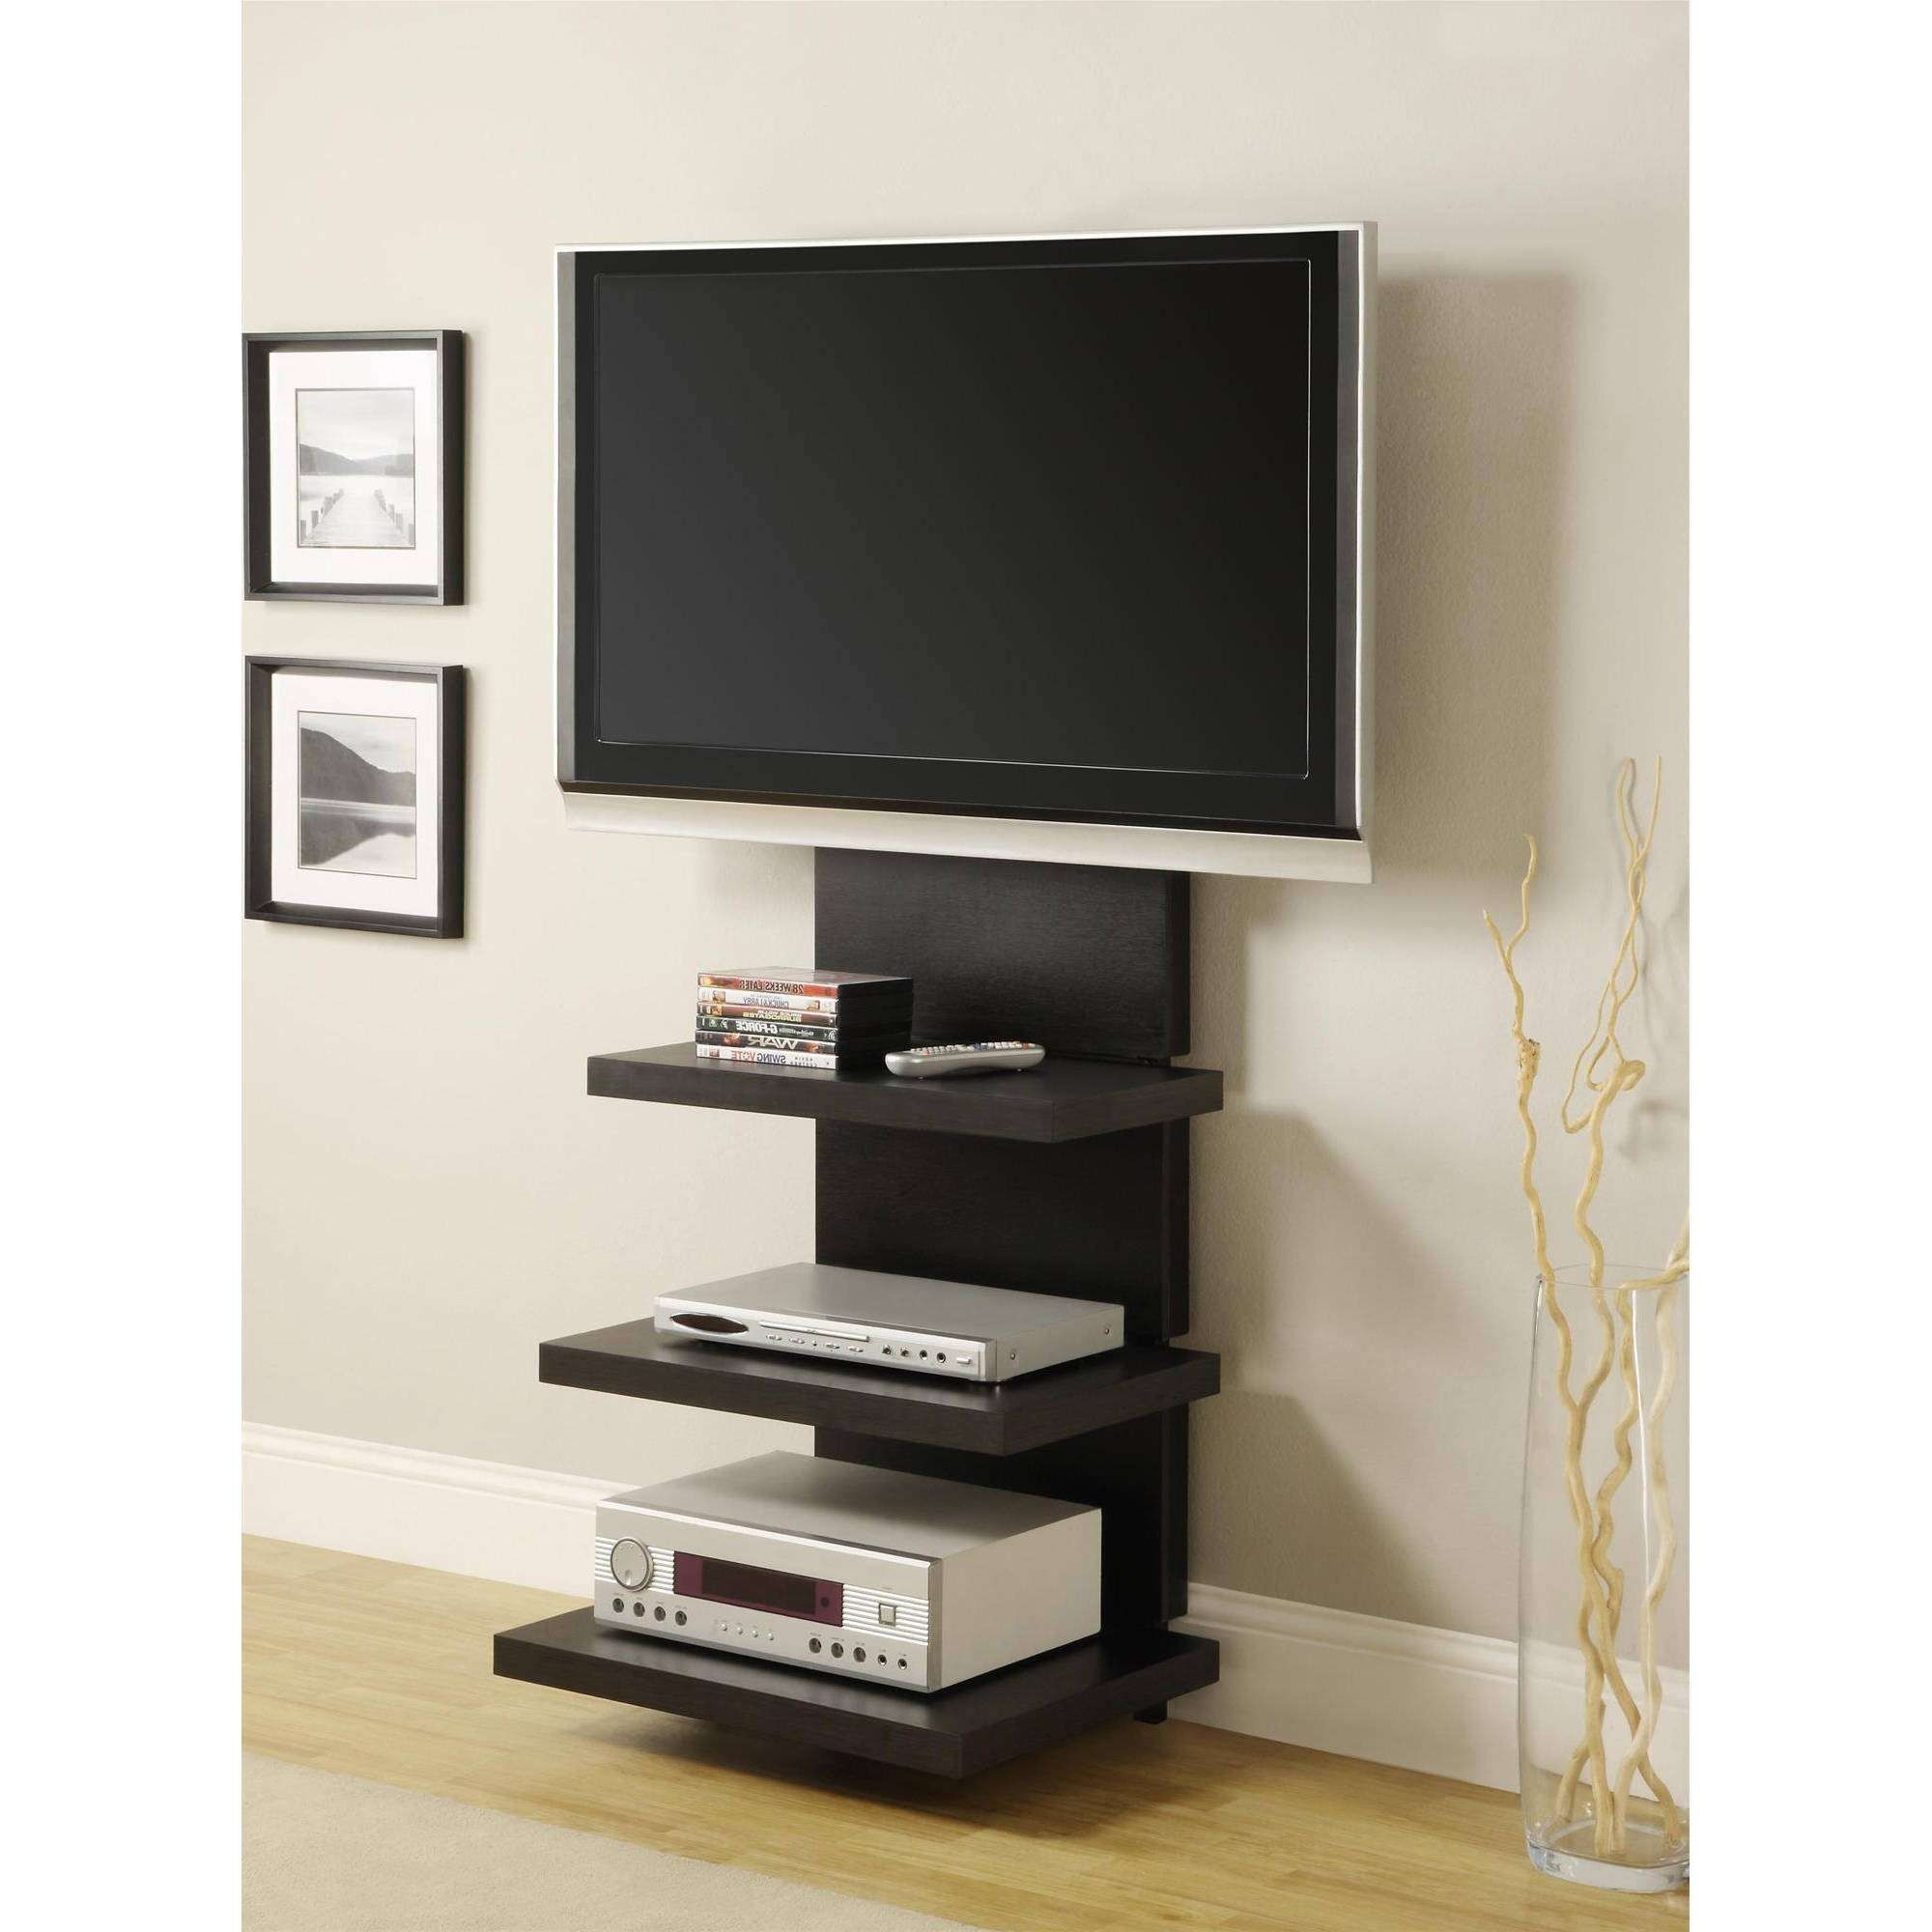 Ameriwood Home Elevation Altramount Tv Stand For Tvs Up To 60 Throughout Wall Mounted Tv Stands With Shelves (Gallery 1 of 15)